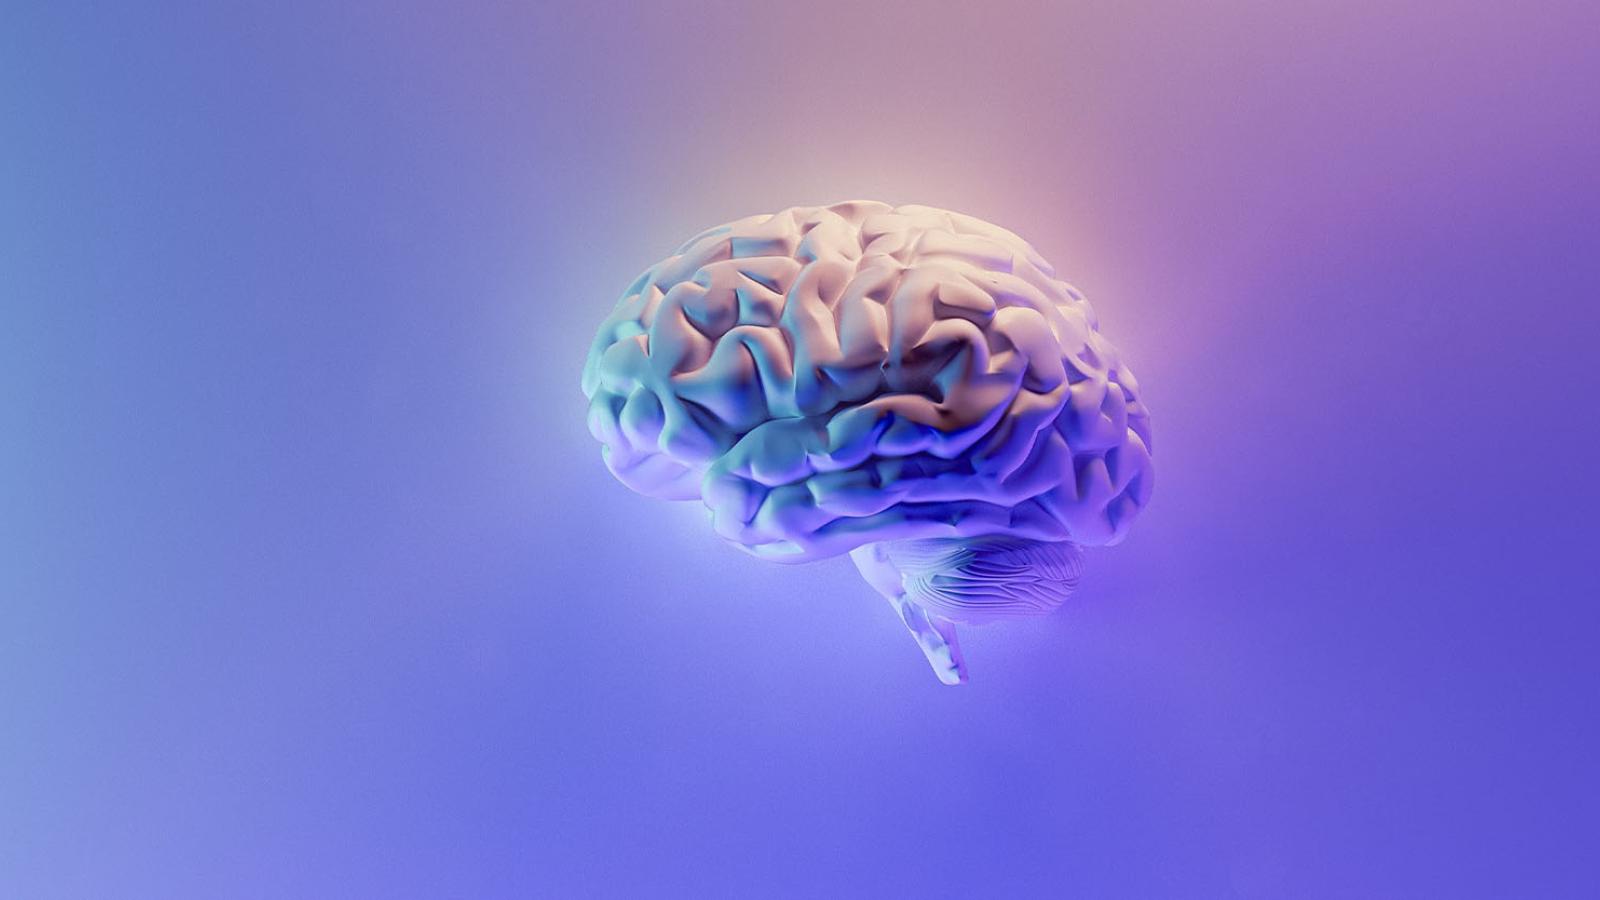 A computer generated brain in pastel pink and blue colors.